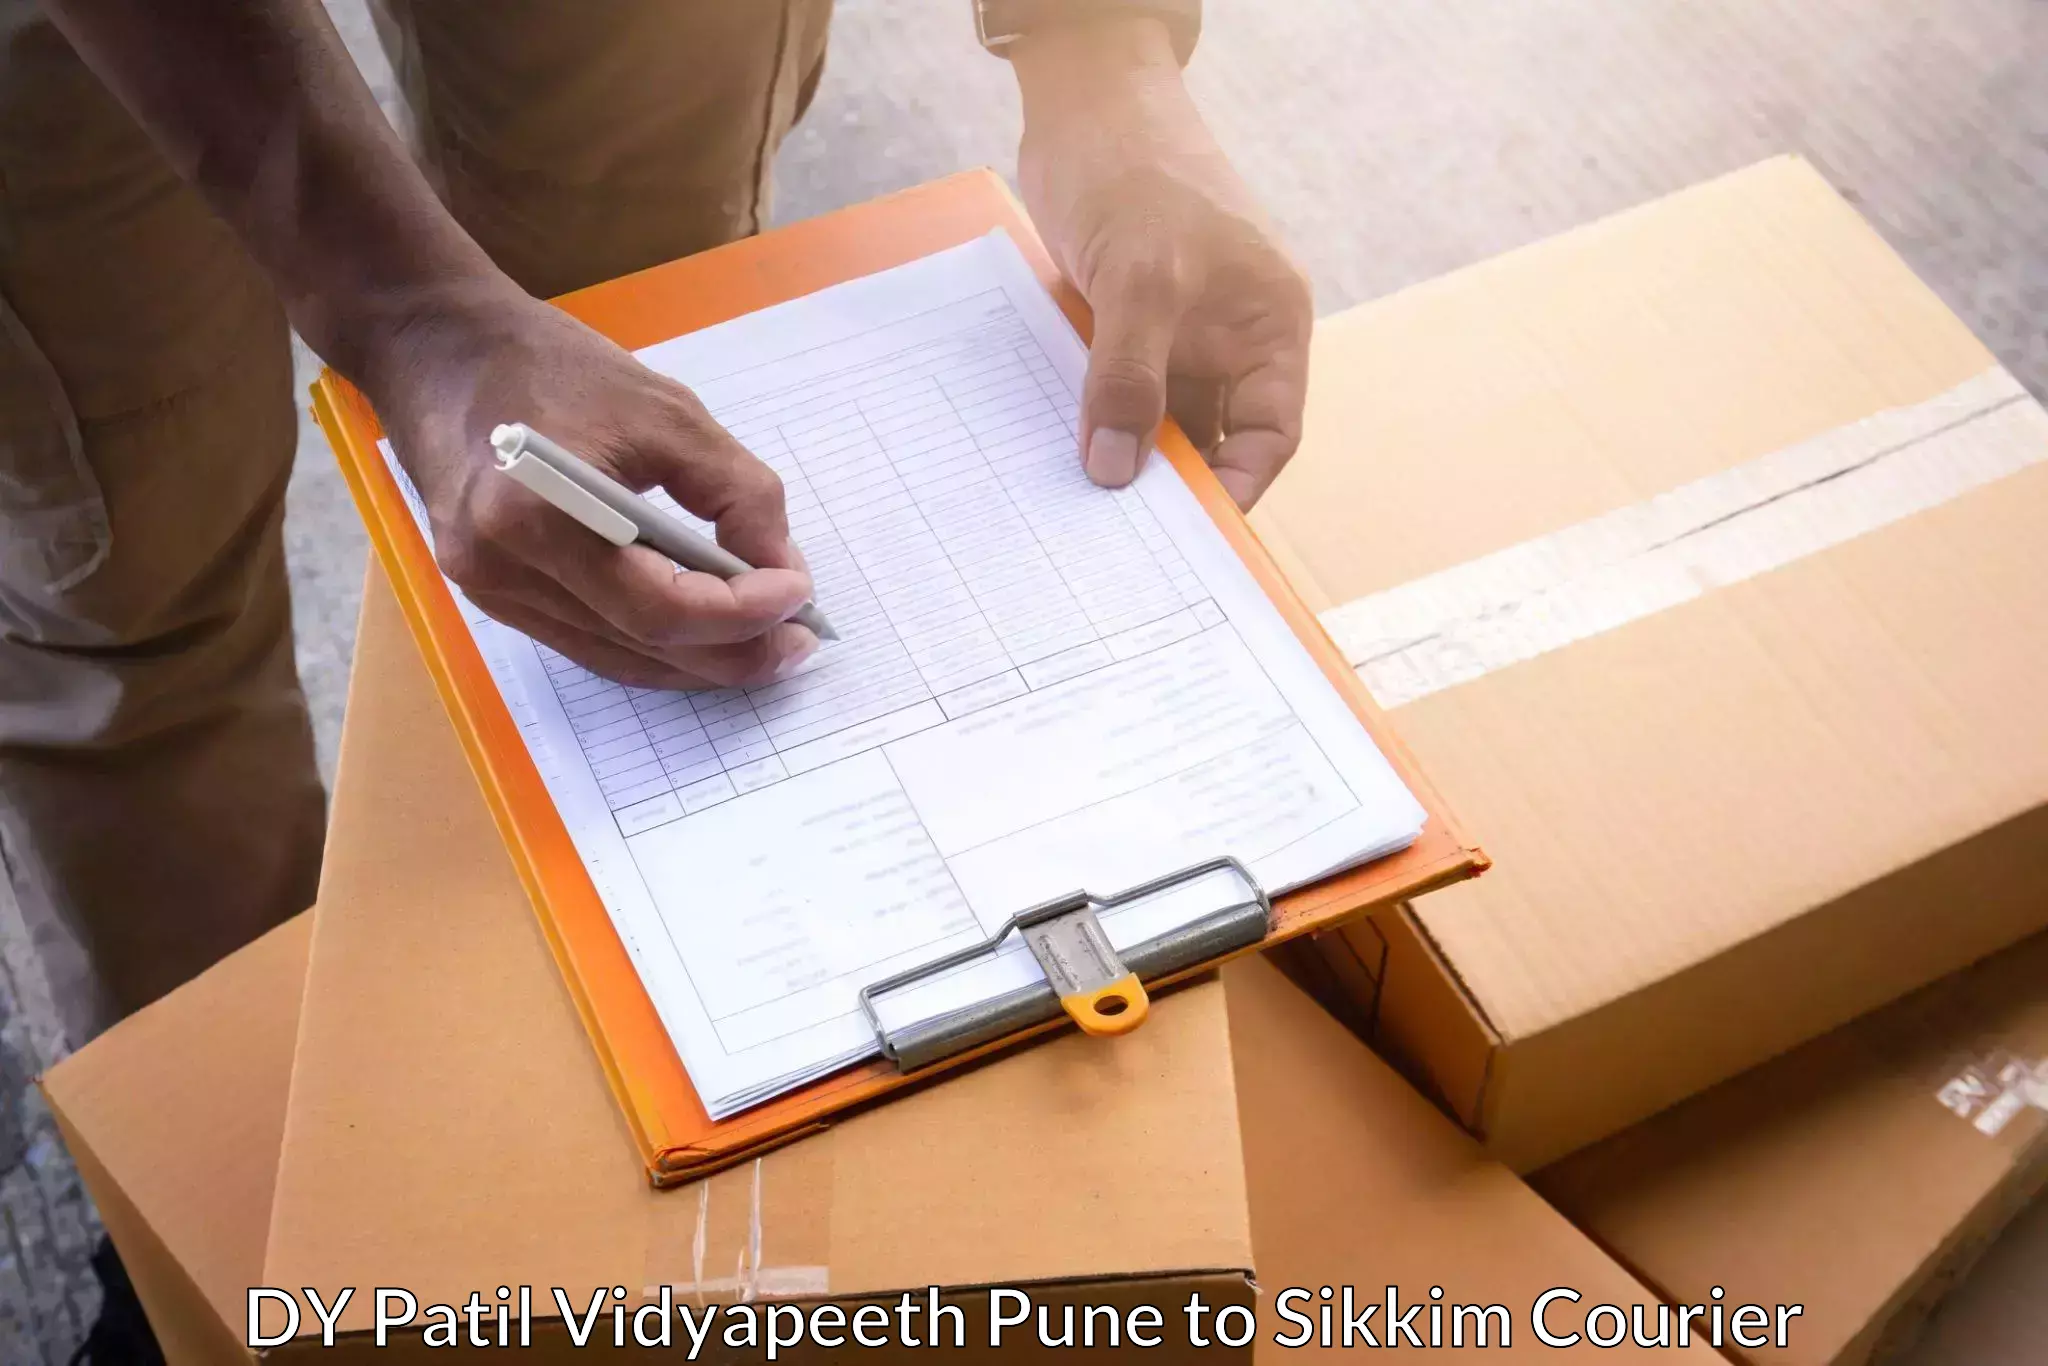 Advanced courier platforms DY Patil Vidyapeeth Pune to Ranipool